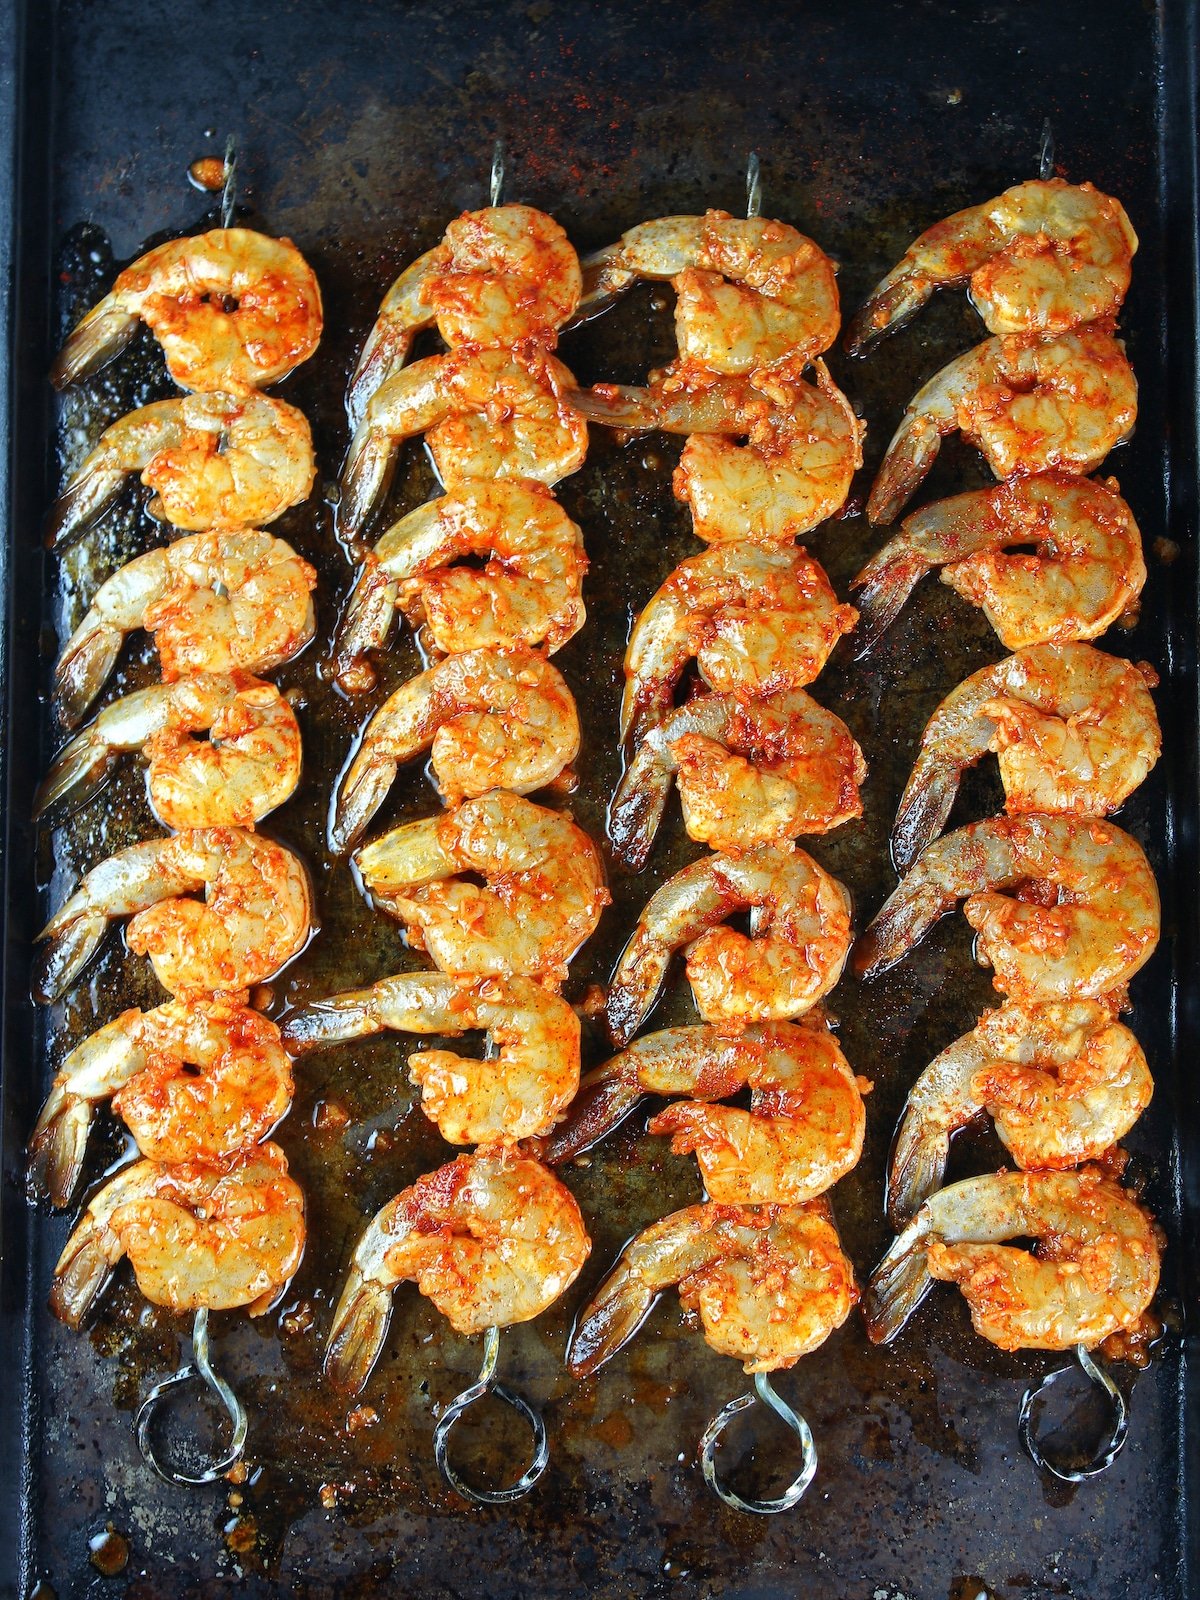 Skewered shrimp on a cookie sheet ready to grill.